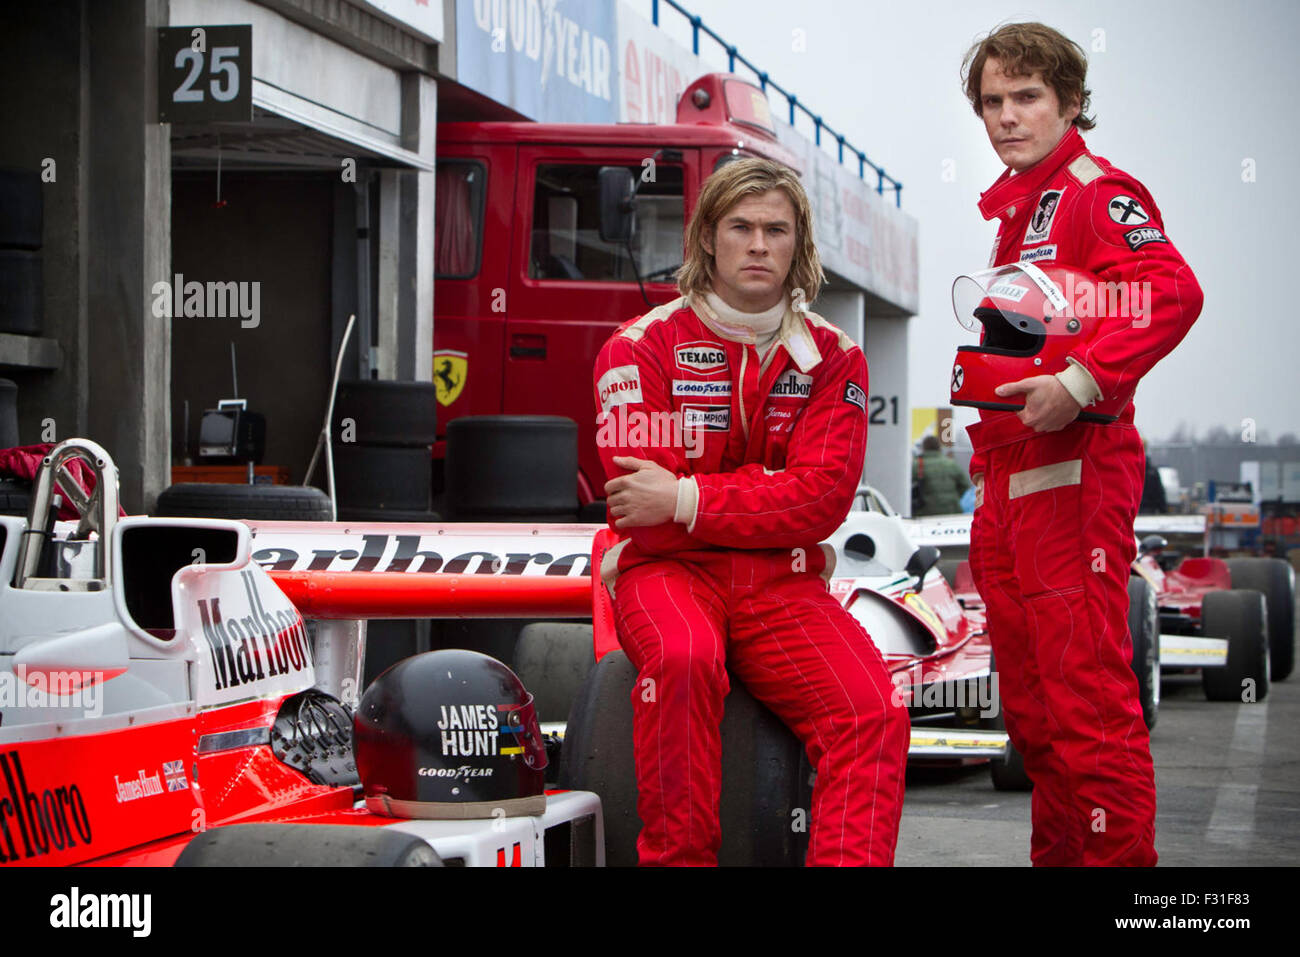 Rush is a 2013 biographical sports drama film centred on the rivalry  between Formula 1 drivers James Hunt and Niki Lauda during the 1976 Formula  One motor-racing season. This photograph is for